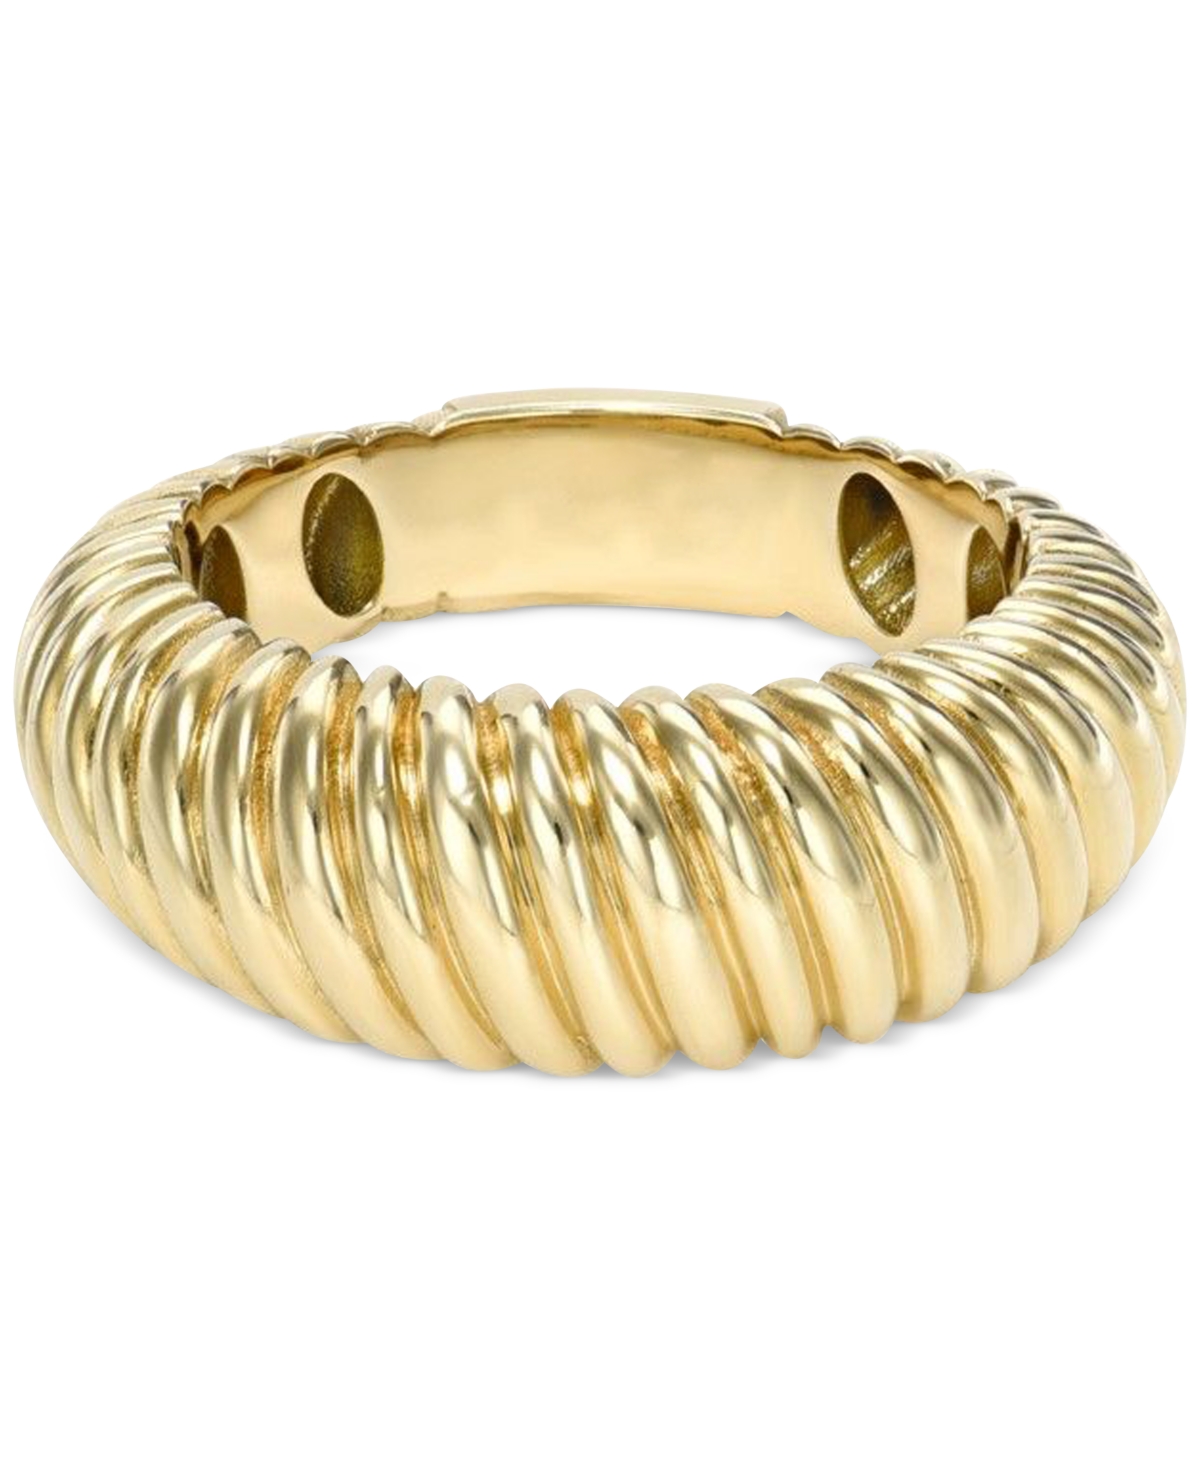 Ribbed Texture Statement Ring in 14k Gold - Gold